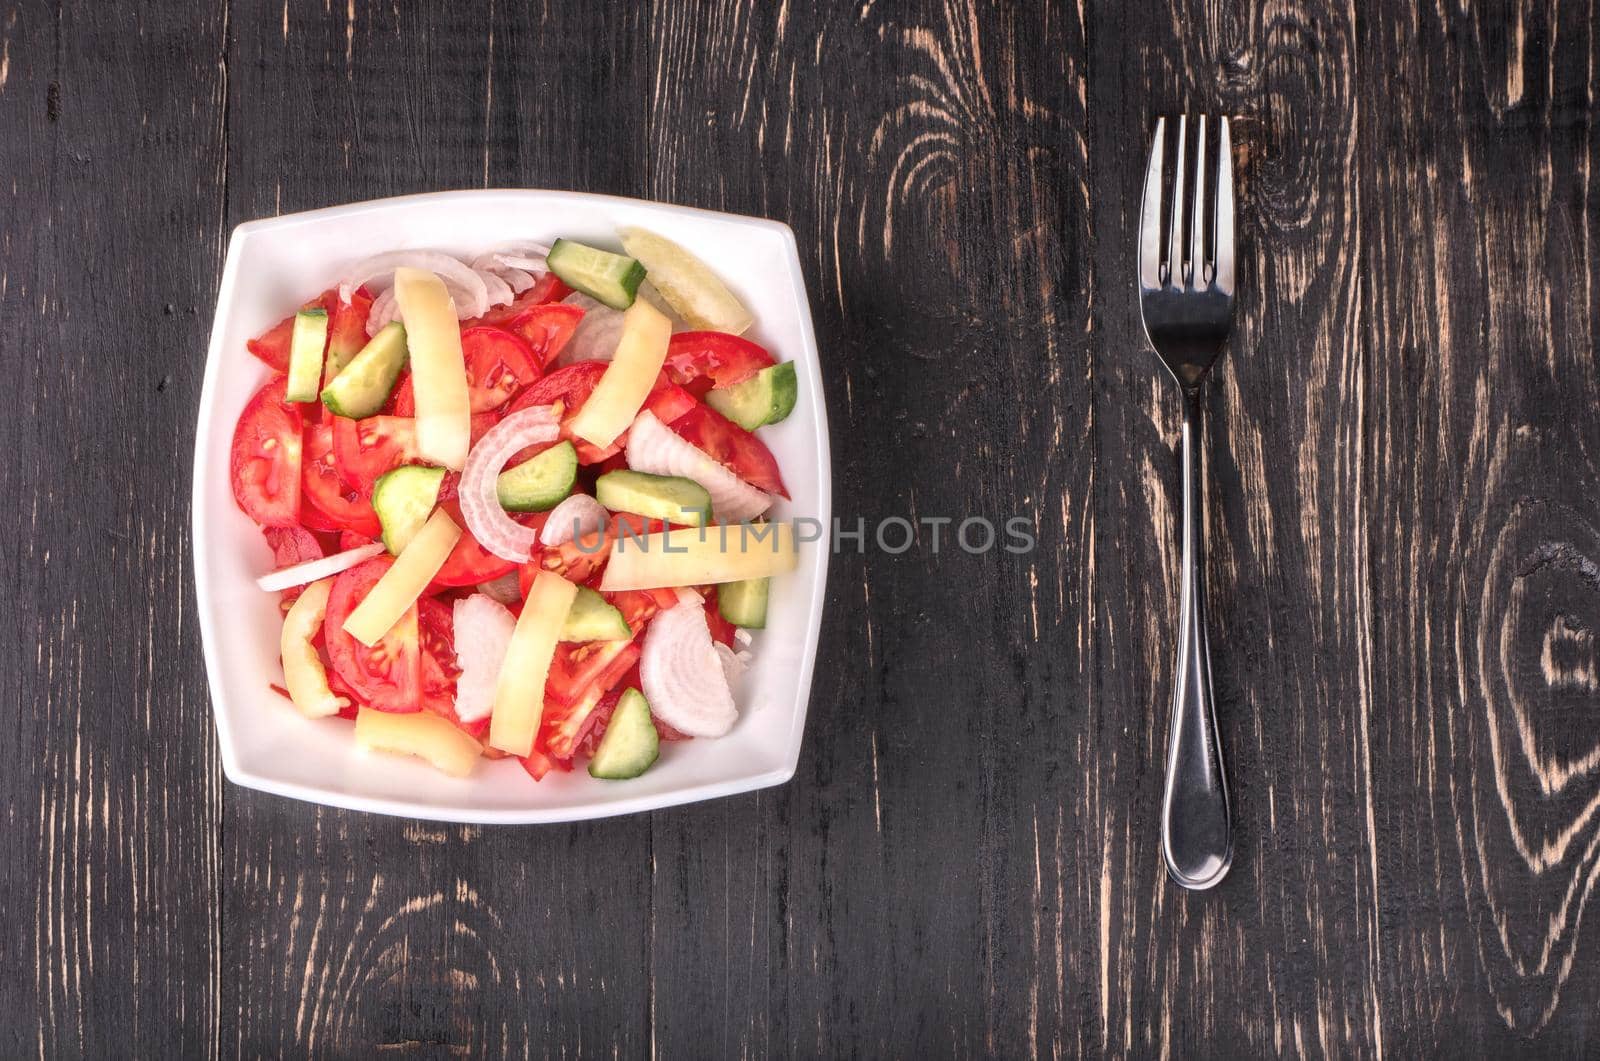 Salad with cucumbers and tomatoes by andregric